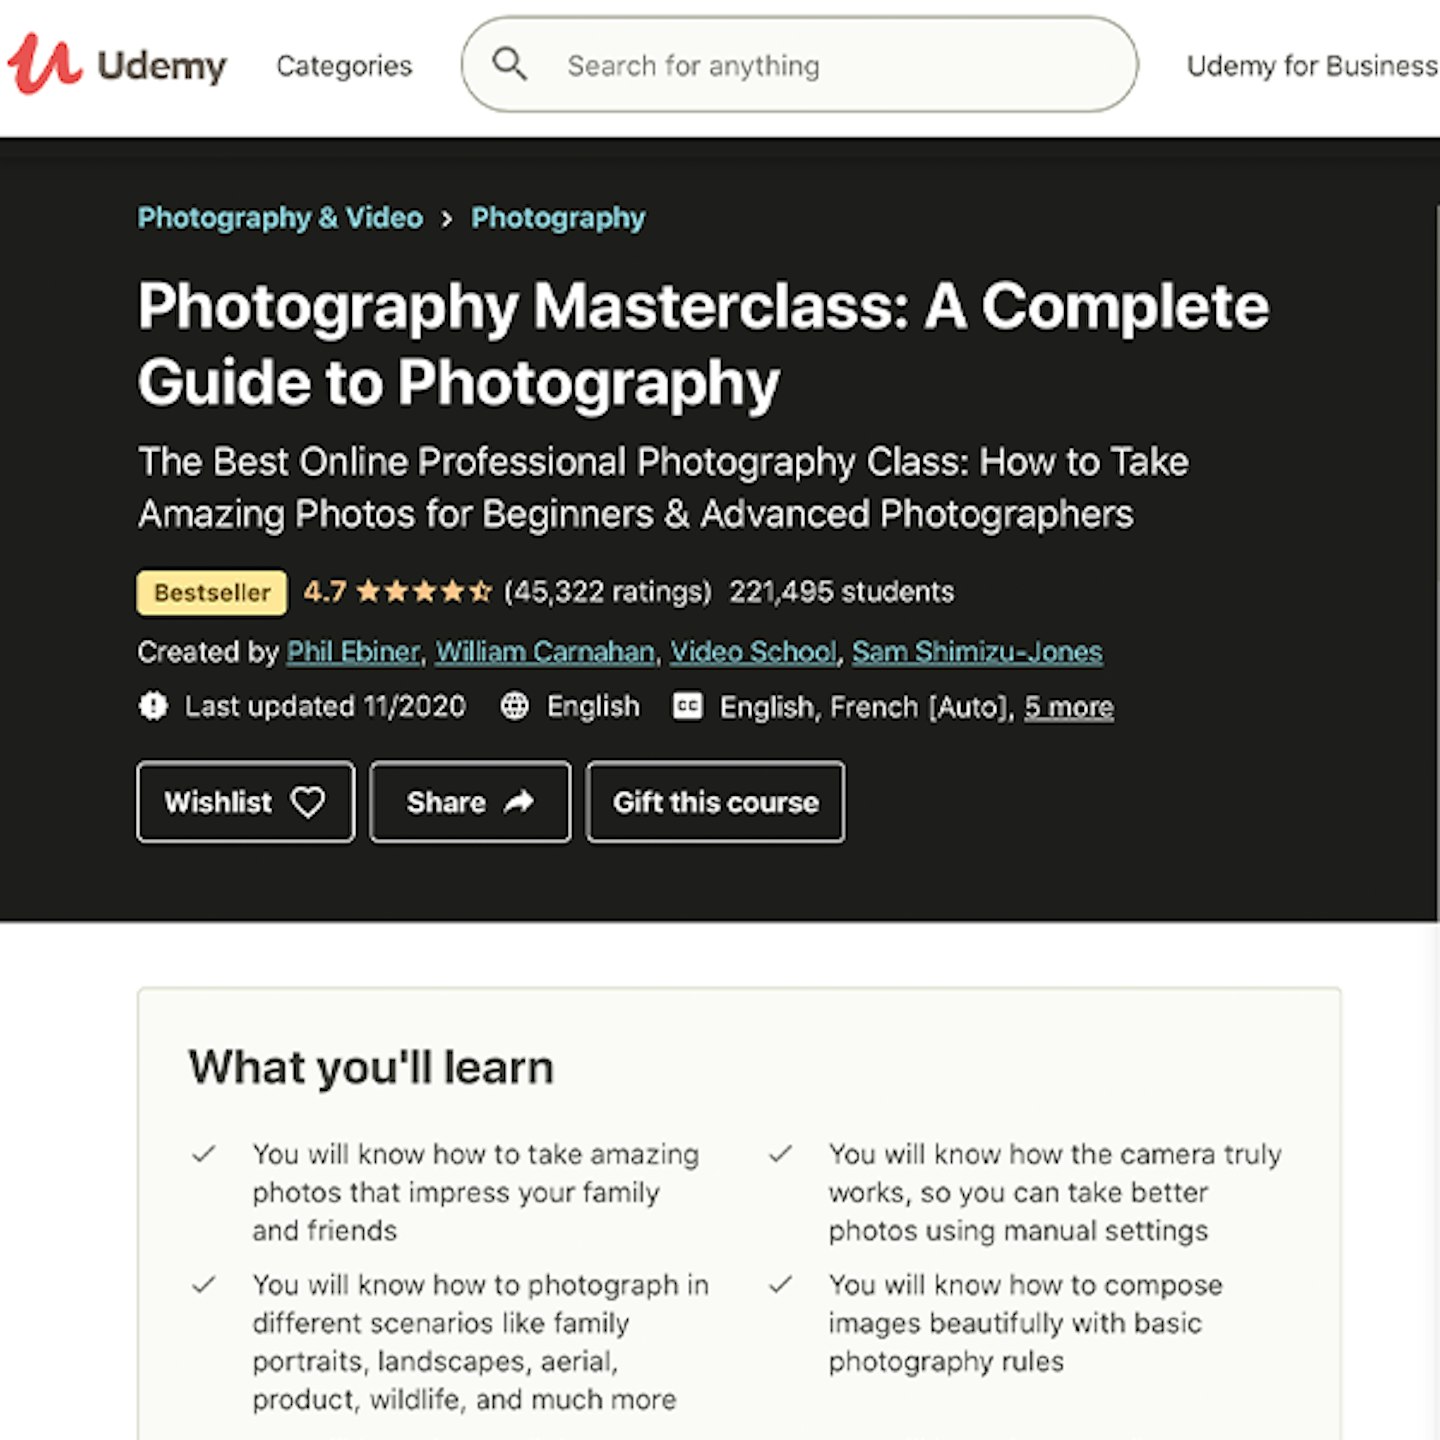 Udemy - Photography Masterclass: A Complete Guide to Photographyu2019